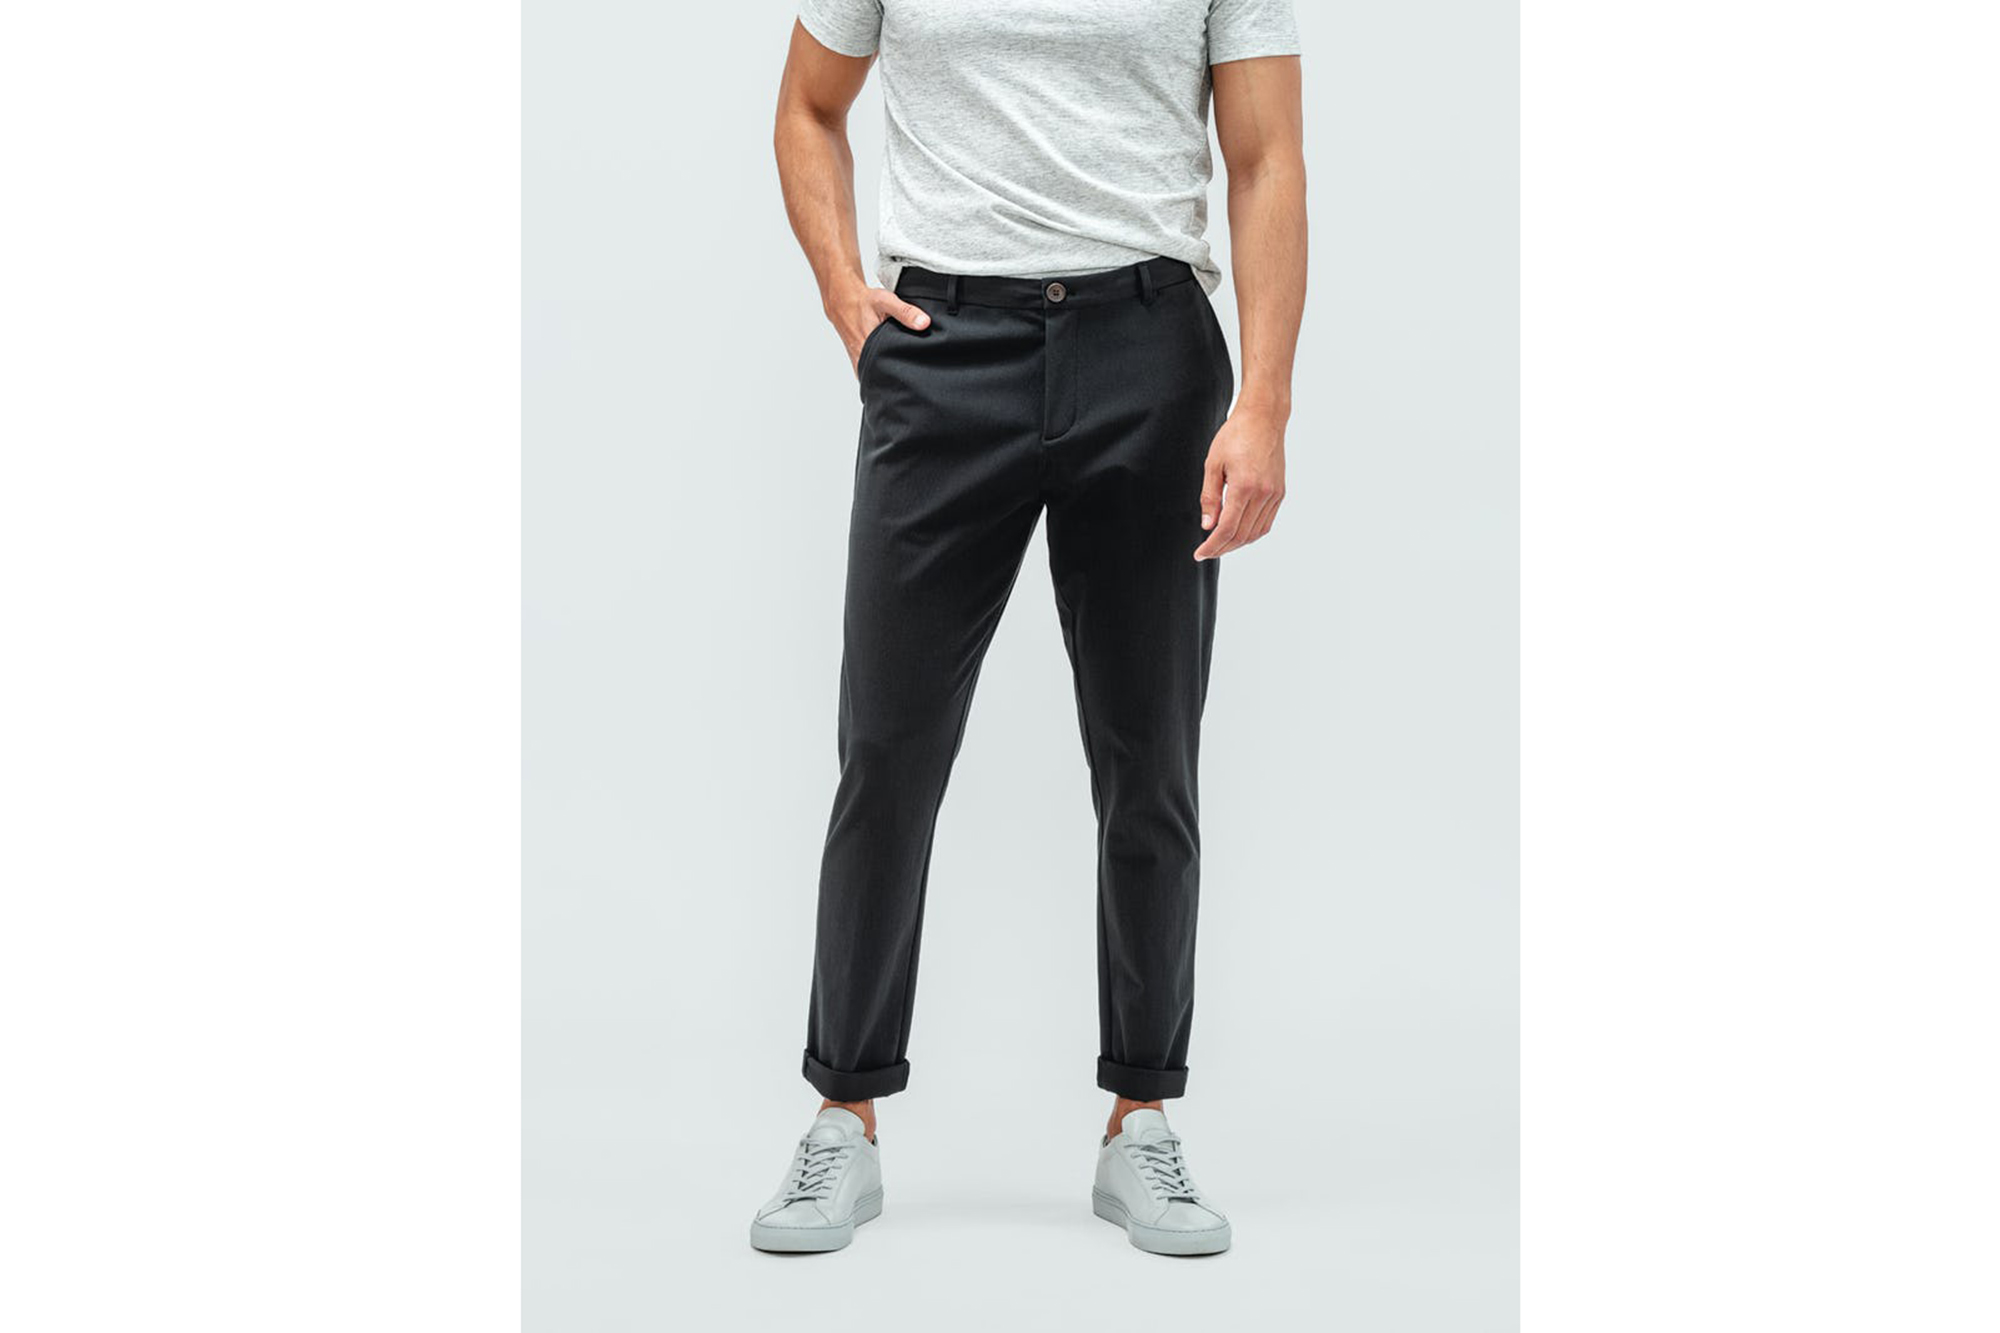 Ministry of Supply Men's Pace Tapered Chino Pants